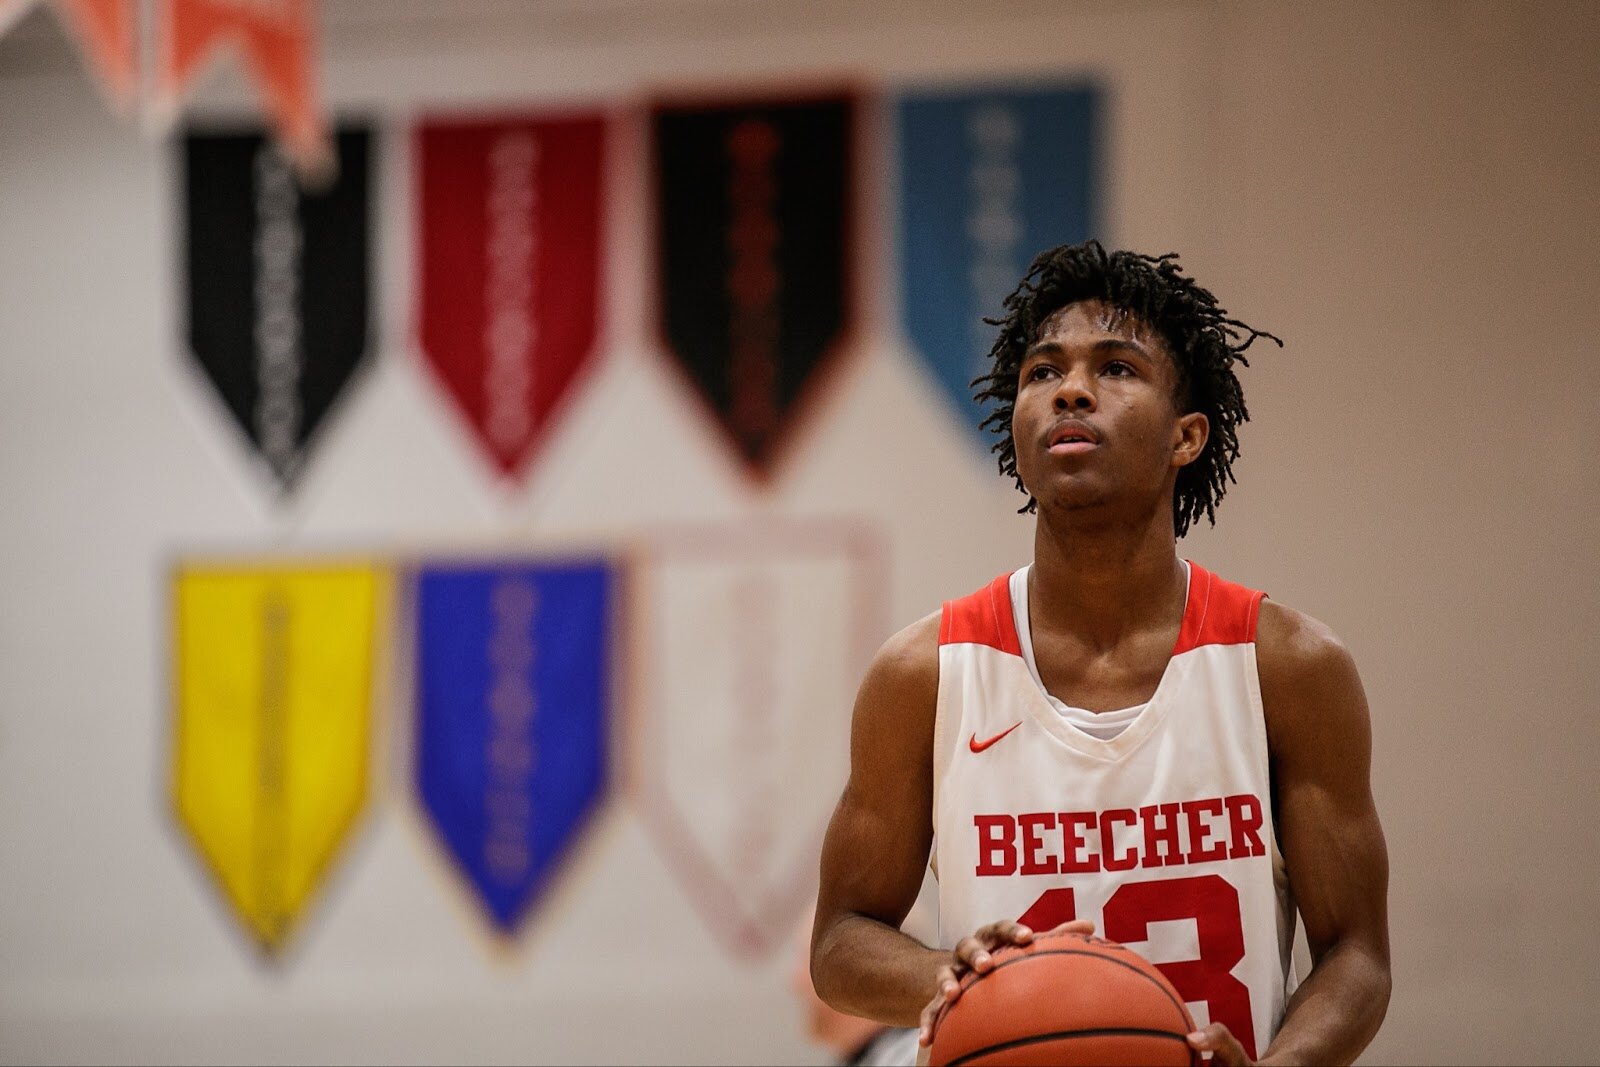 Beecher junior Damarcus Burke takes a deep breath before shooting a free throw during the boys' varsity basketball game on Saturday, Feb. 18, 2023, at the Moses Lacey Fieldhouse in Mount Morris. Beecher defeated Hamady 48-43.